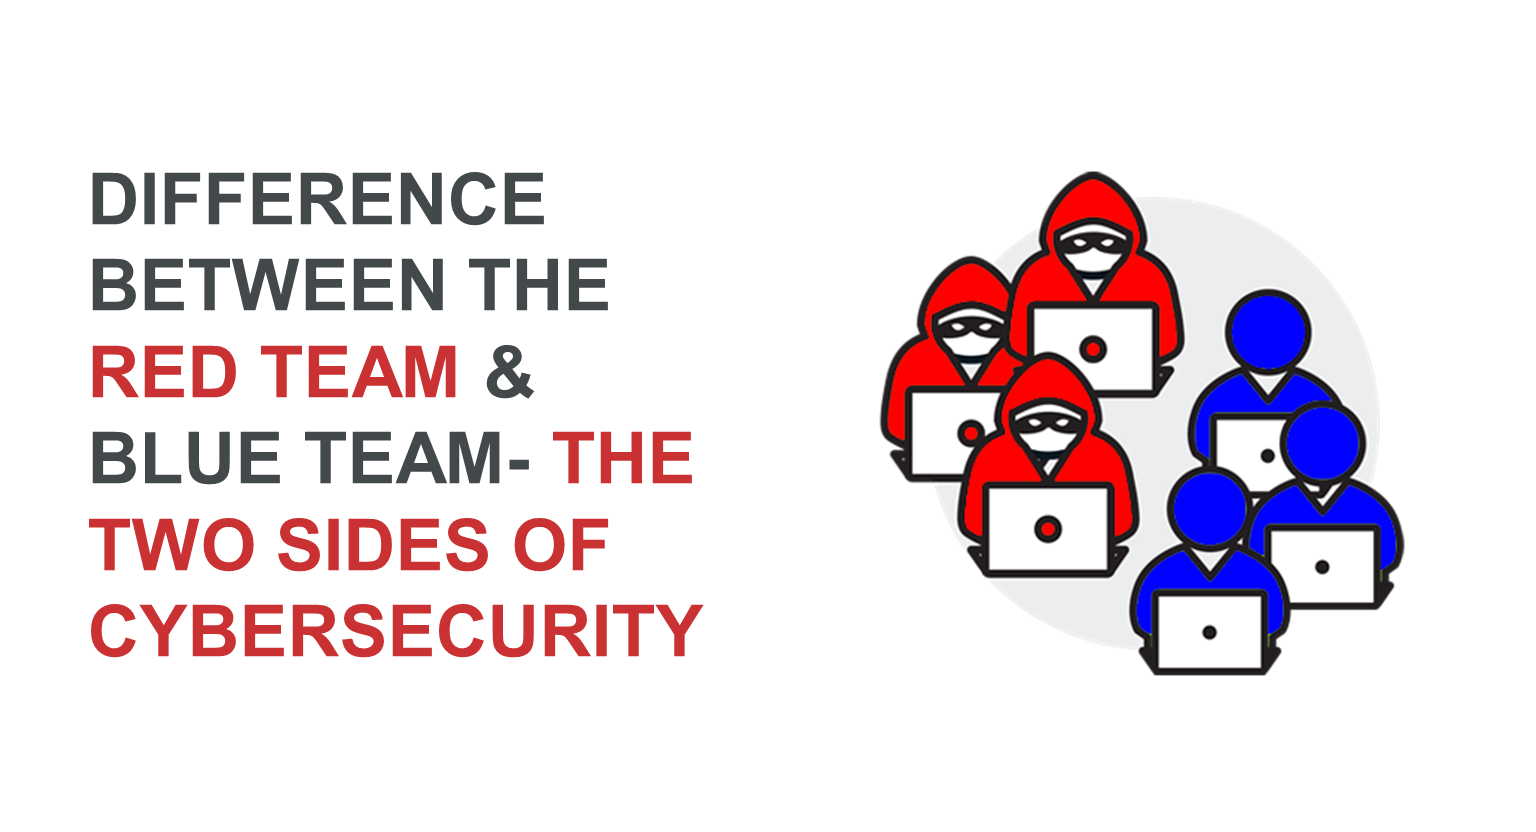 Difference between the Red team and Blue team - the two sides of cybersecurity